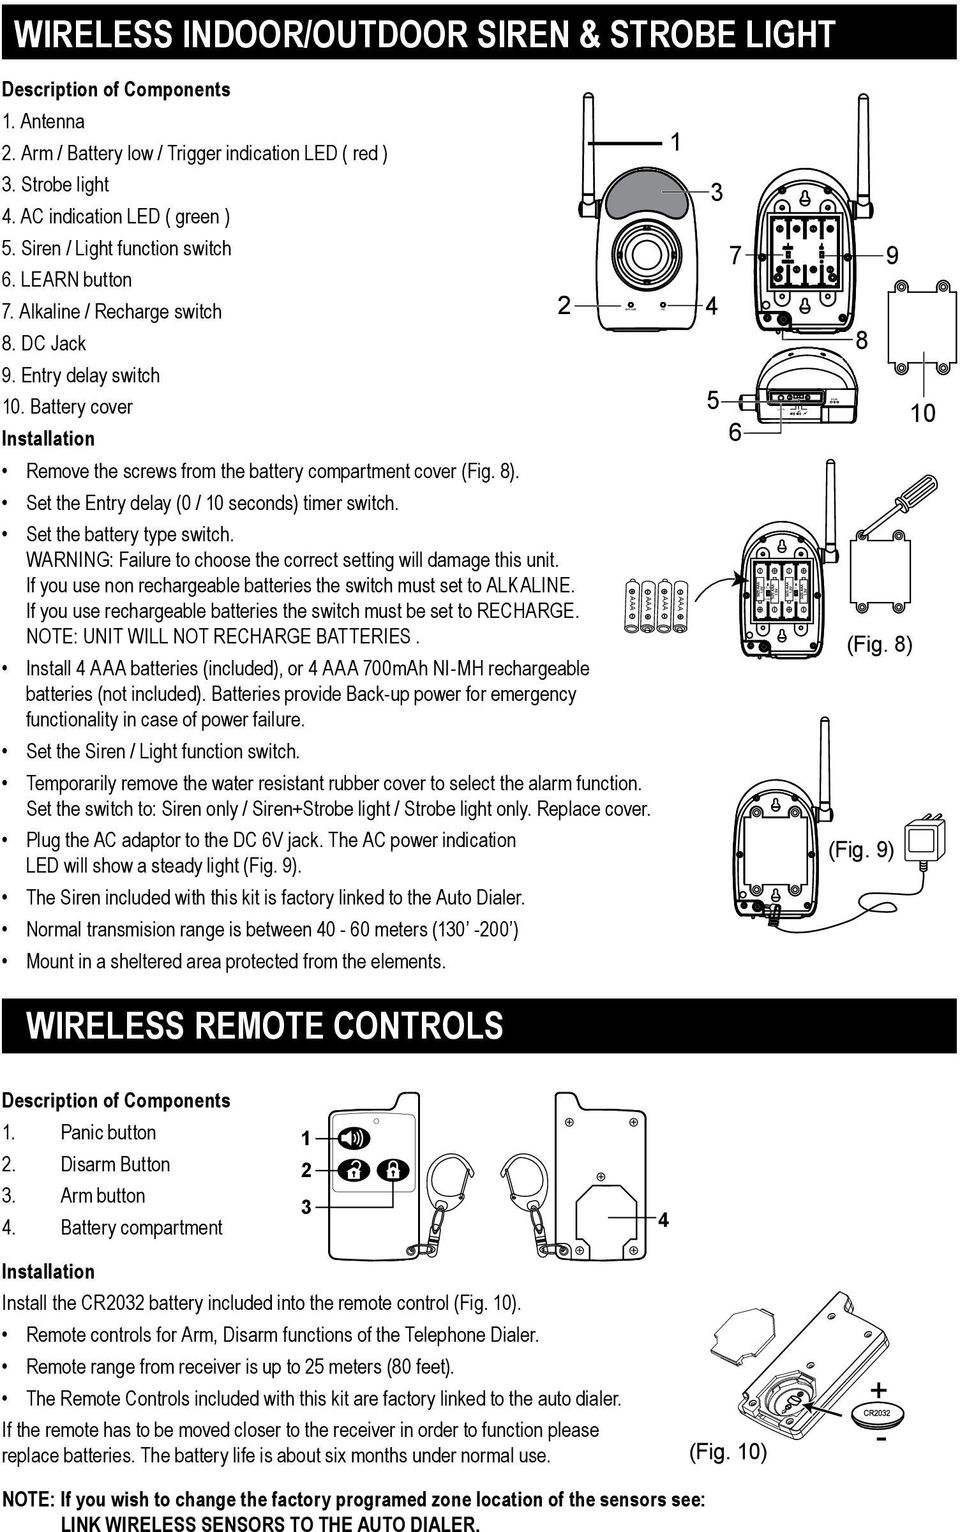 DC Jack 9. Entry delay switch 10. Battery cover Installation 2 1 3 7 4 5 6 8 9 10 Remove the screws from the battery compartment cover (Fig. 8). Set the Entry delay (0 / 10 seconds) timer switch.